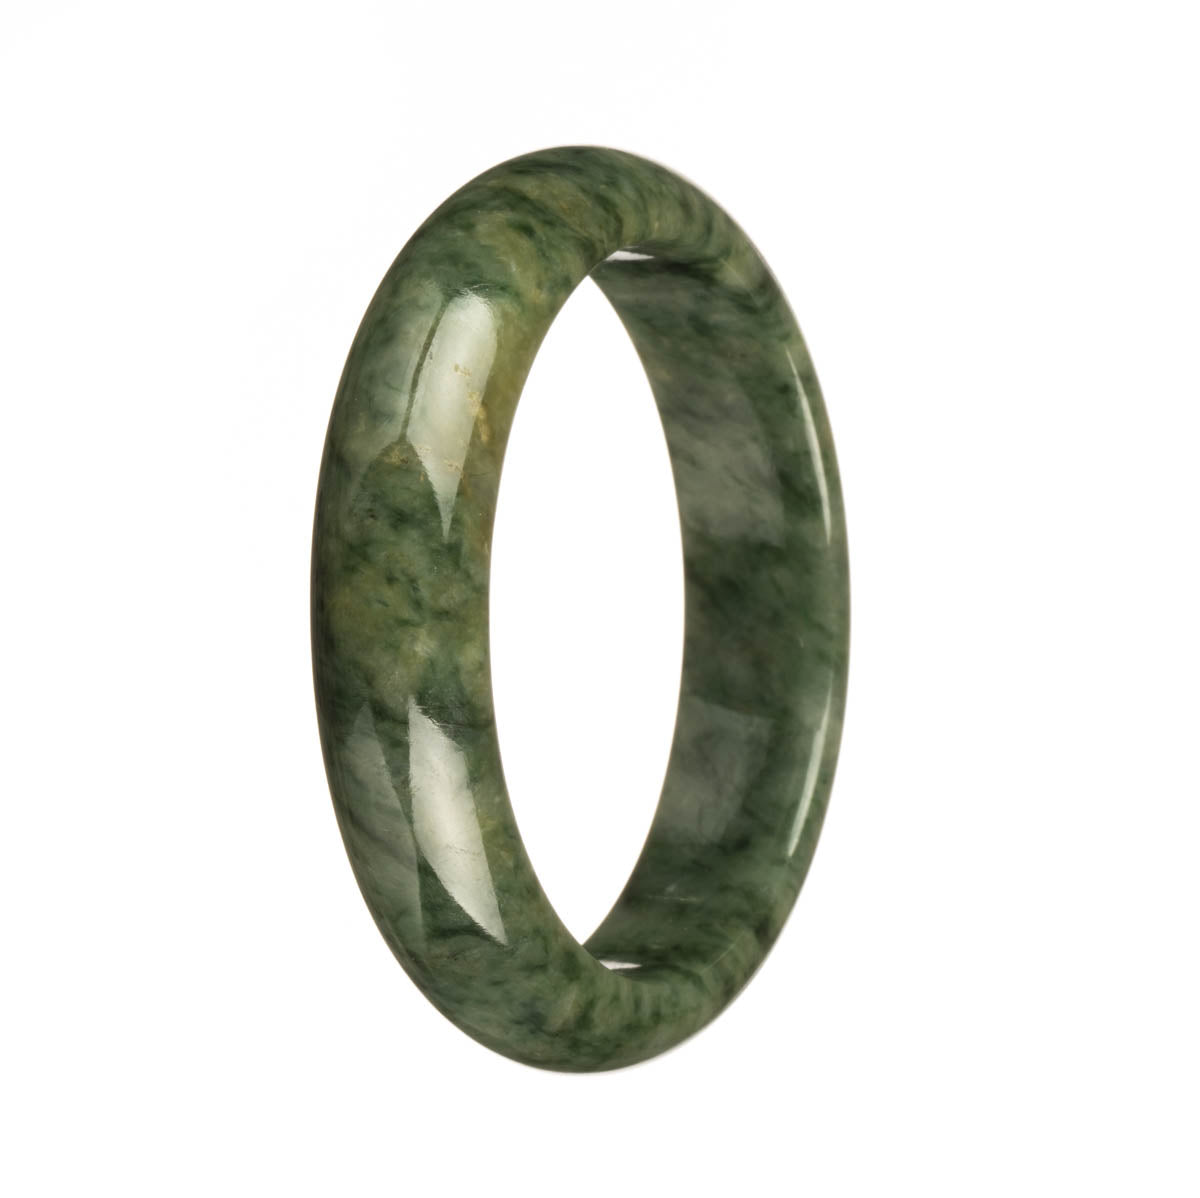 A close-up image of a dark green jade bangle bracelet with a half moon pattern. The bracelet is made of genuine grade A jadeite jade and measures 58mm in diameter. It is a beautiful and unique piece of jewelry from MAYS GEMS.